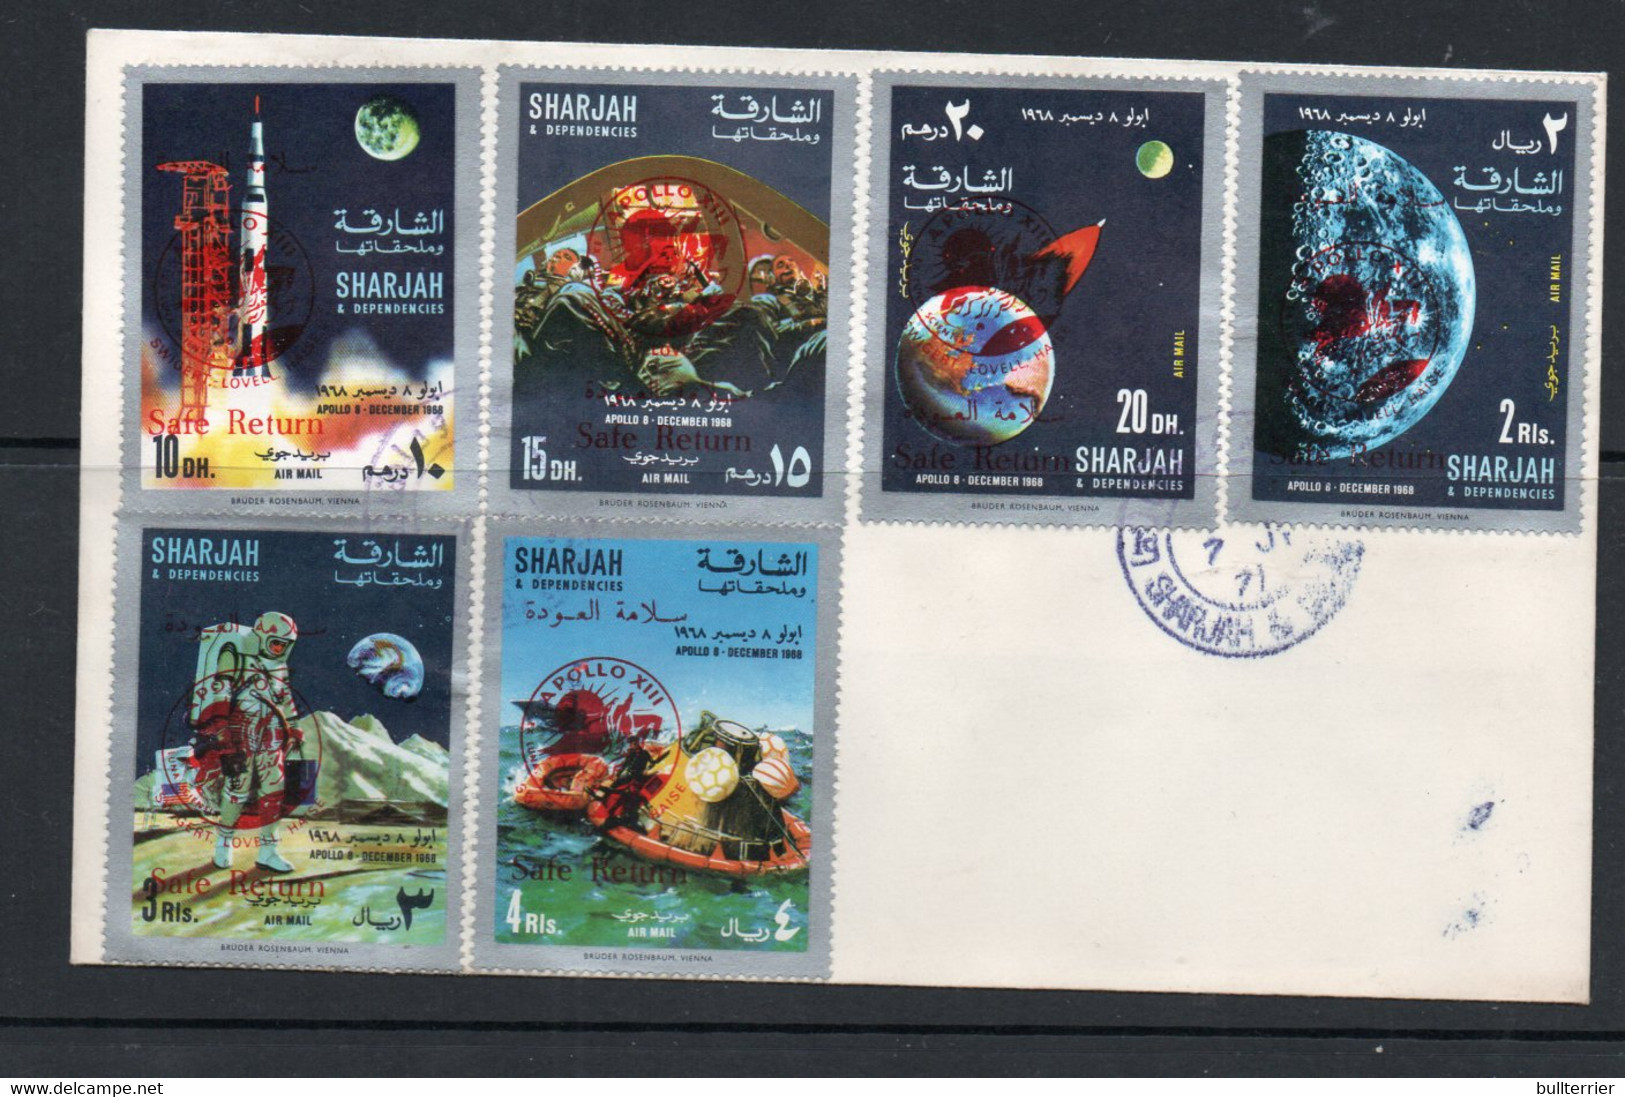 SPACE - SHARJAH  -1969 - SPACE SET OF 6 PERF  ILLUSTRATED FDCS - Asia